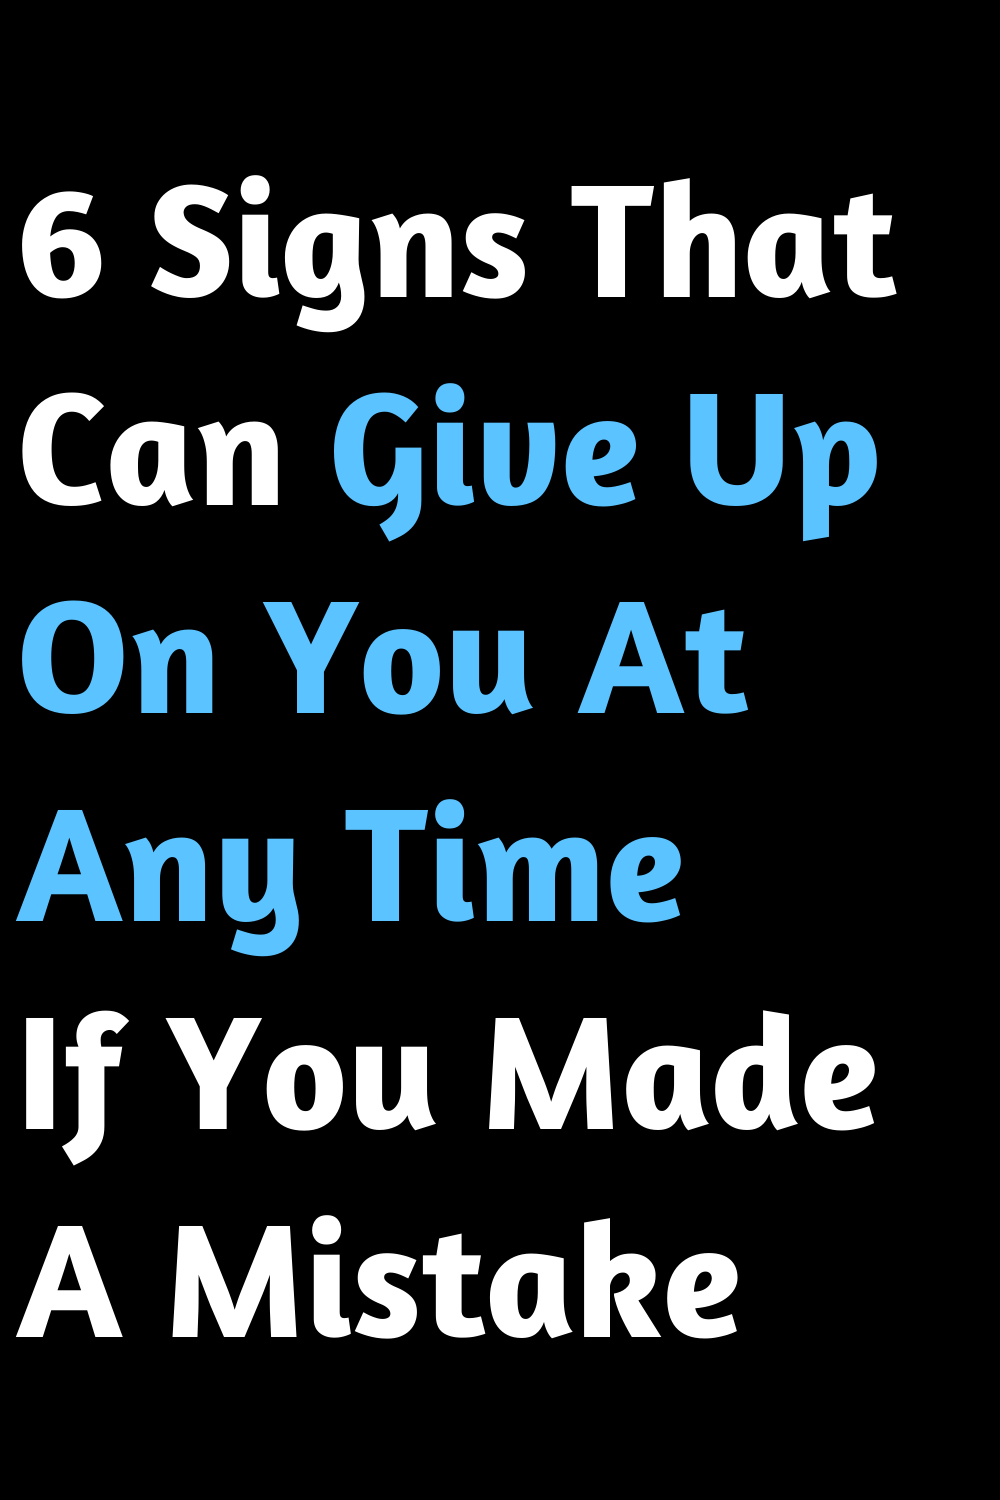 6 Signs That Can Give Up On You At Any Time If You Made A Mistake